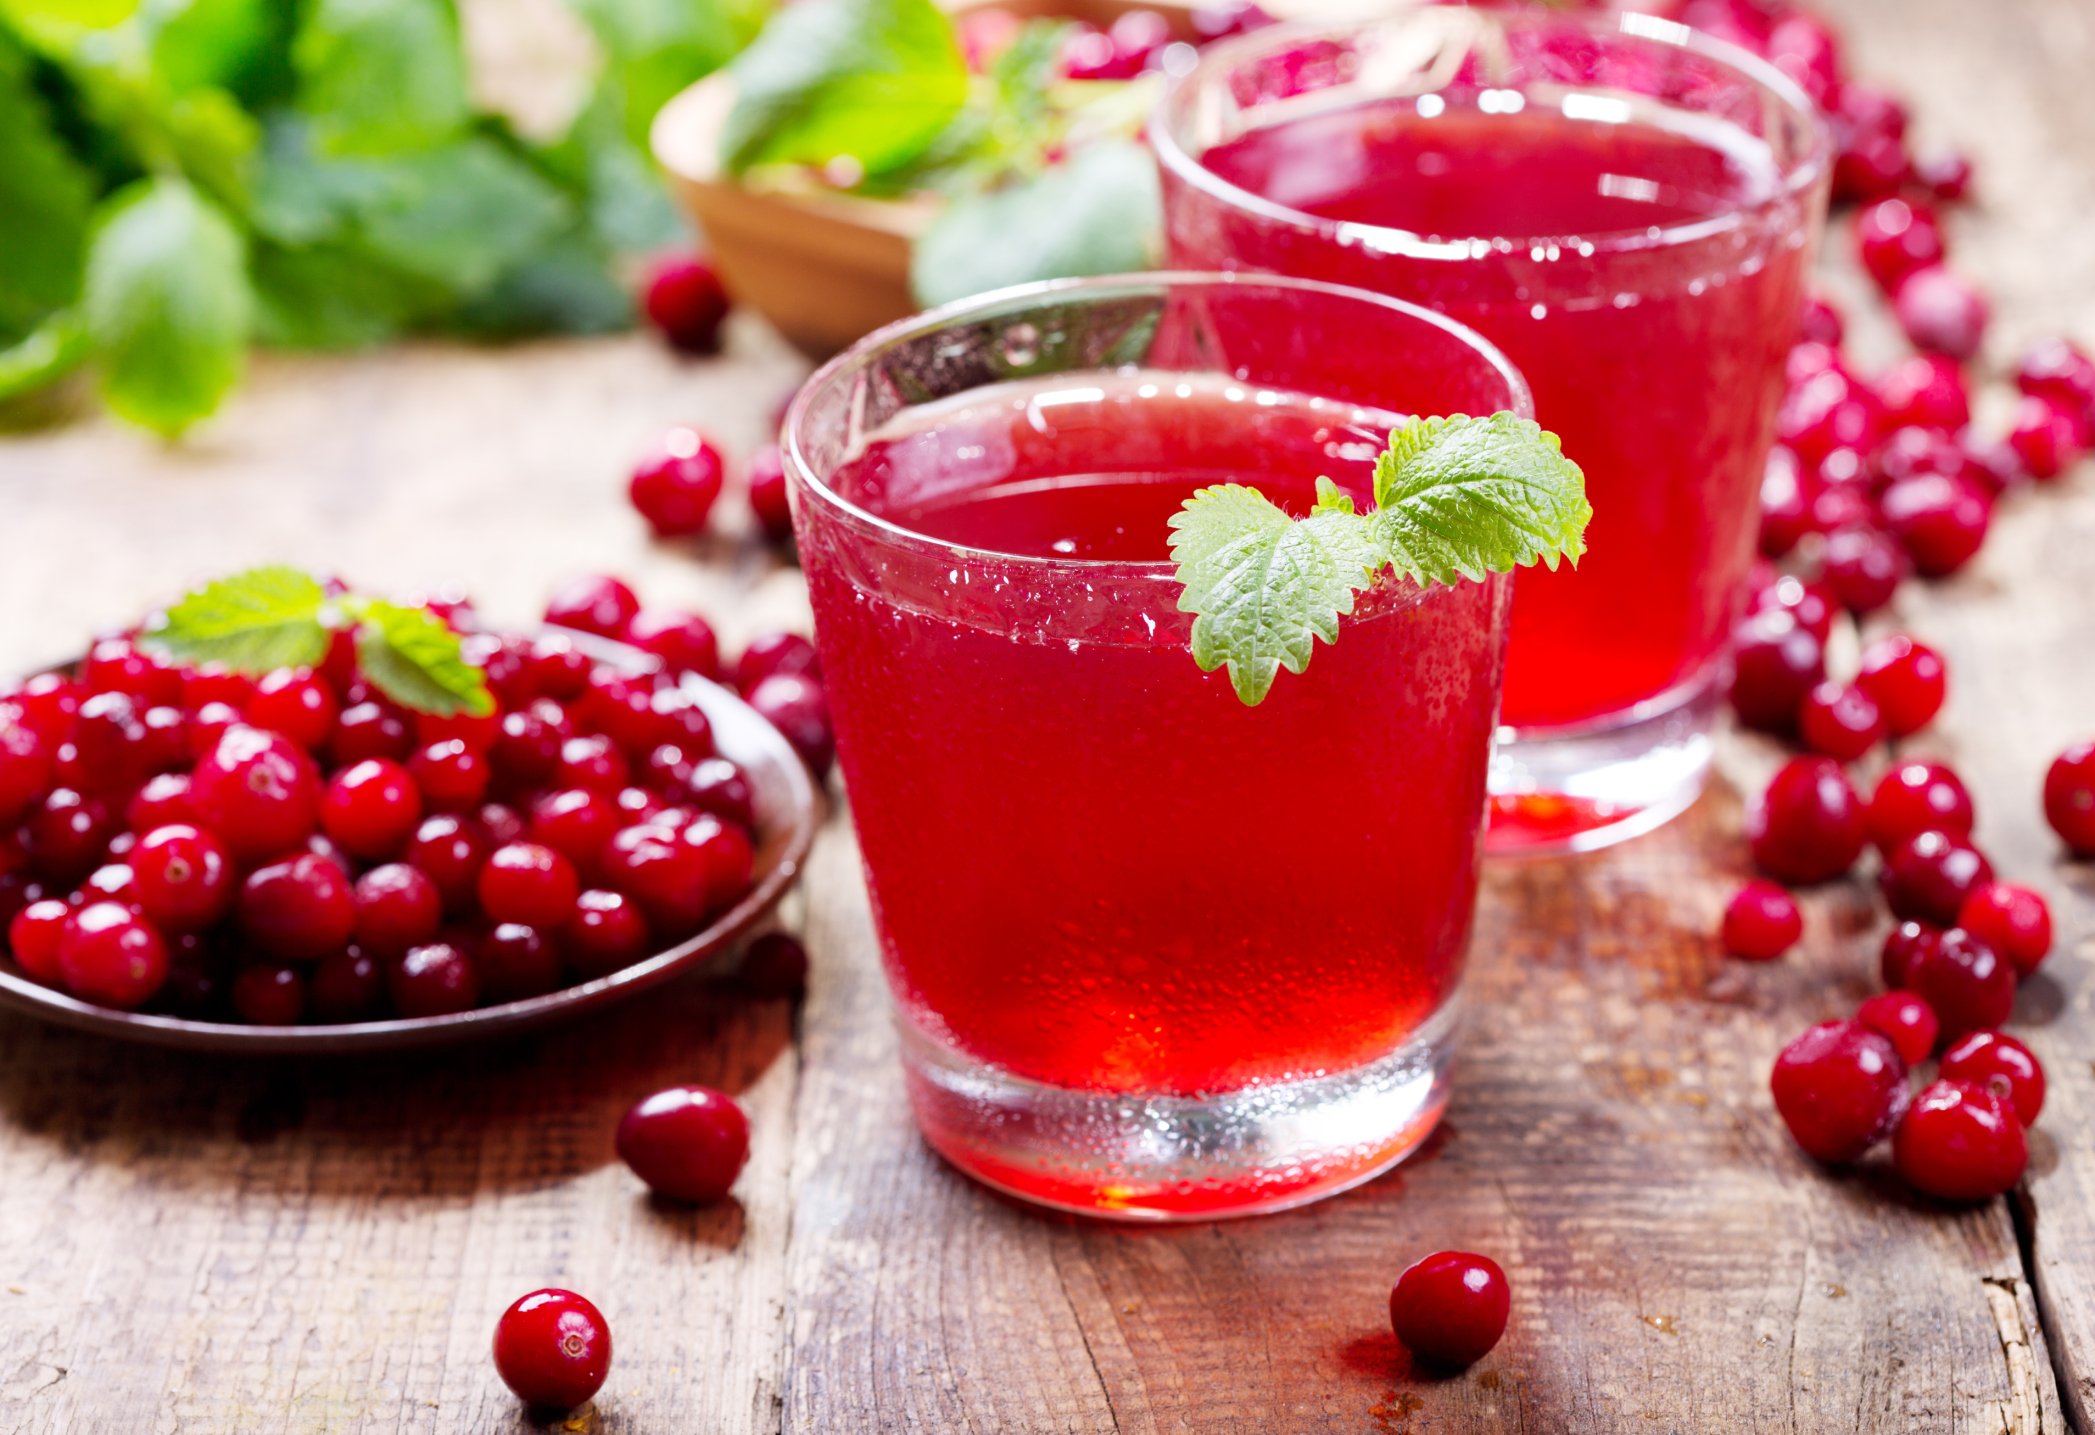 Can Cranberry Juice Give You a Headache?